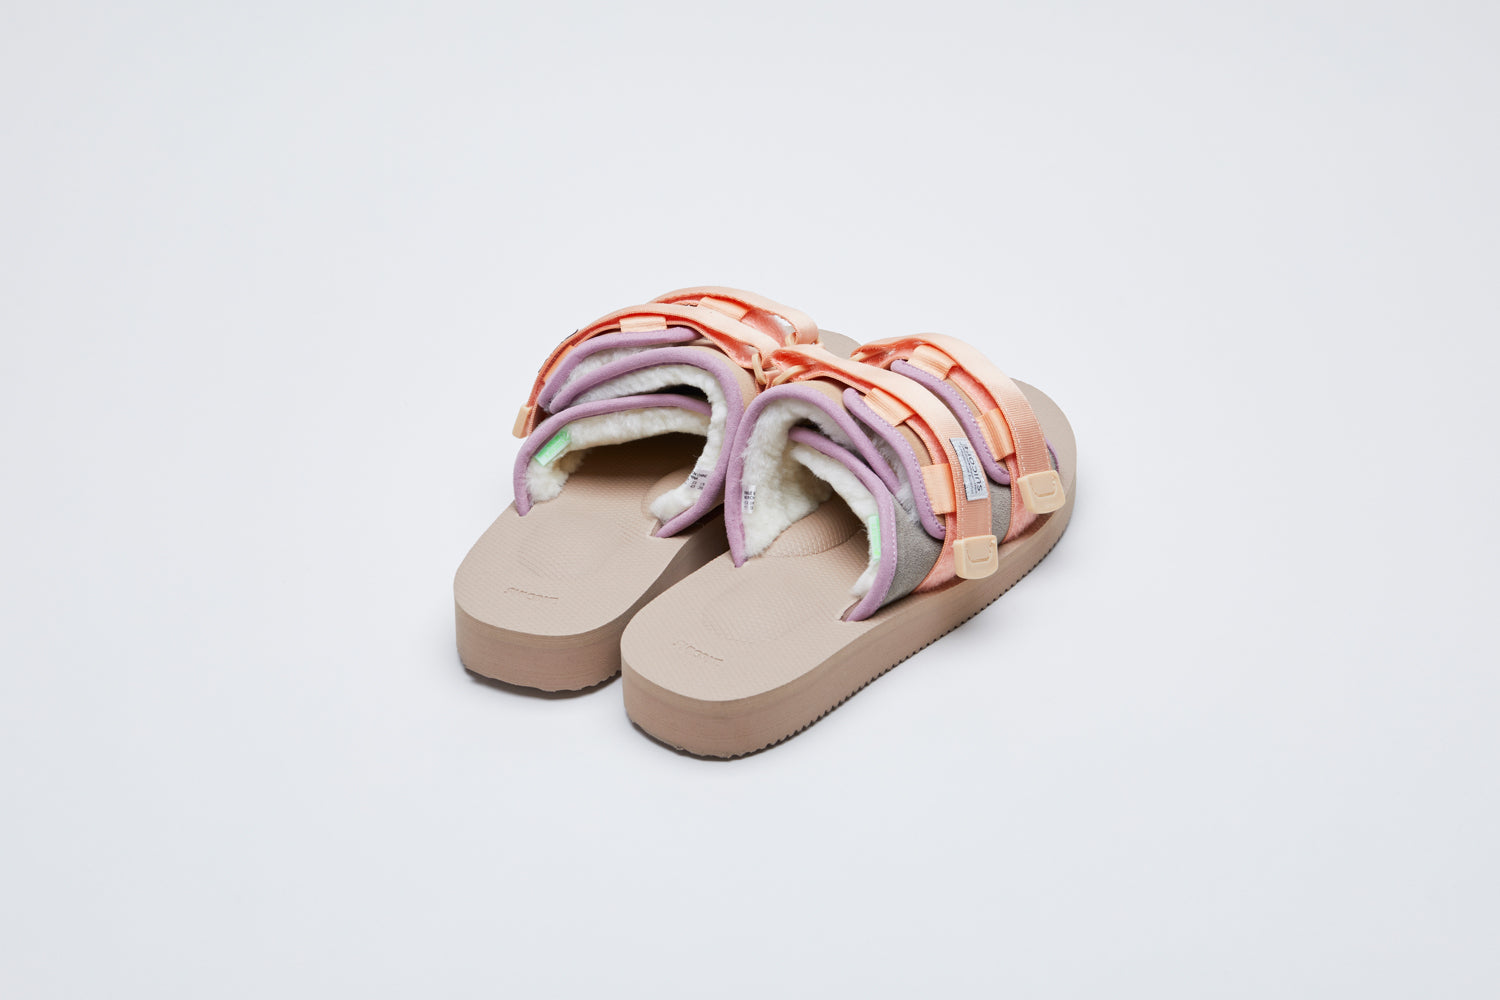 SUICOKE MOTO-Mab suede slides with beige midsole and sole, gray suede upper and shearling inside with light purple piping and light pink nylon straps. From Fall/Winter 2021 collection on SUICOKE Official US &amp; Canada Webstore.